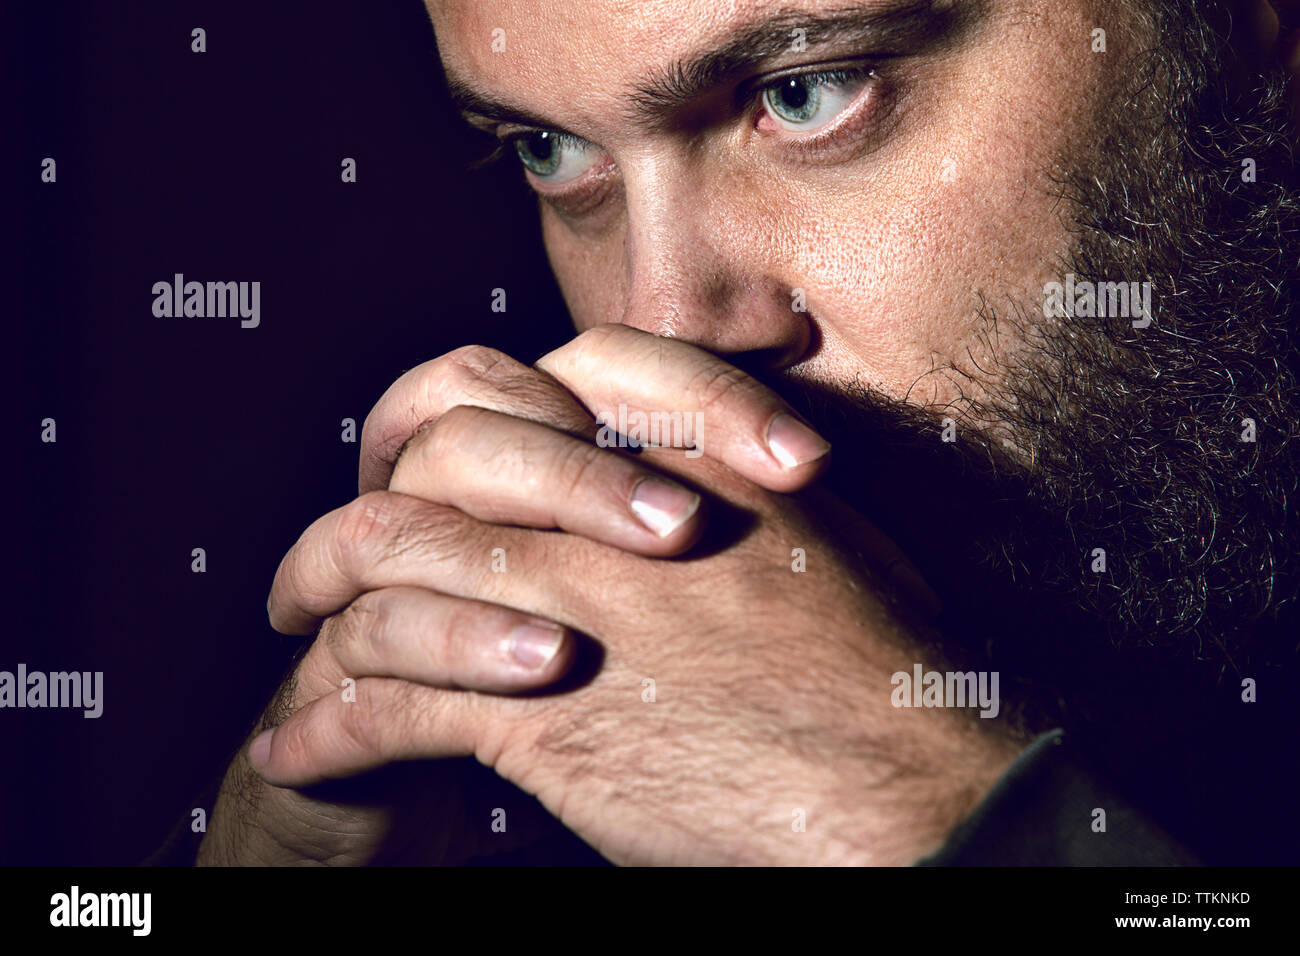 Close-up of serious man against black background Stock Photo